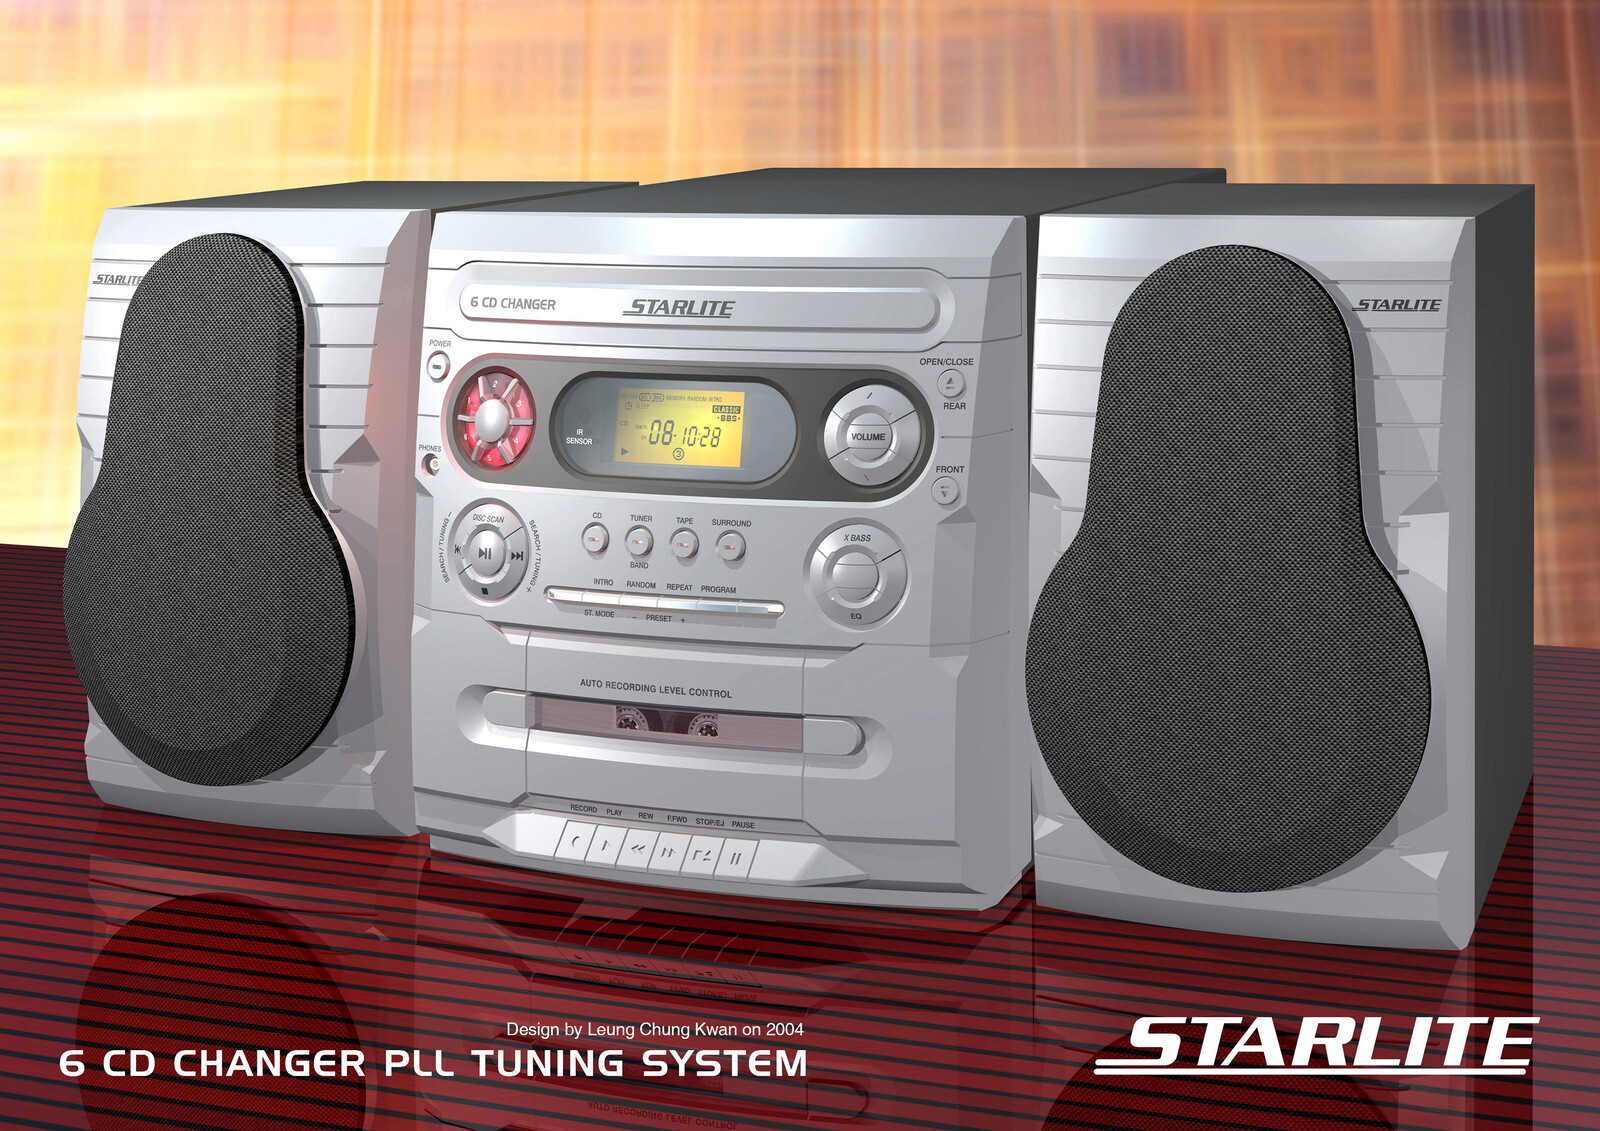 💎 6 CD Changer PLL Tuner with Single Cassette Hi-Fi | Design by Leung Chung Kwan on 2004 💎
Brand Name︰Starlite | Client︰Star Light Electronics Co., LTD.
Other Views︰http://bit.ly/sl02b-6cd-pll-single